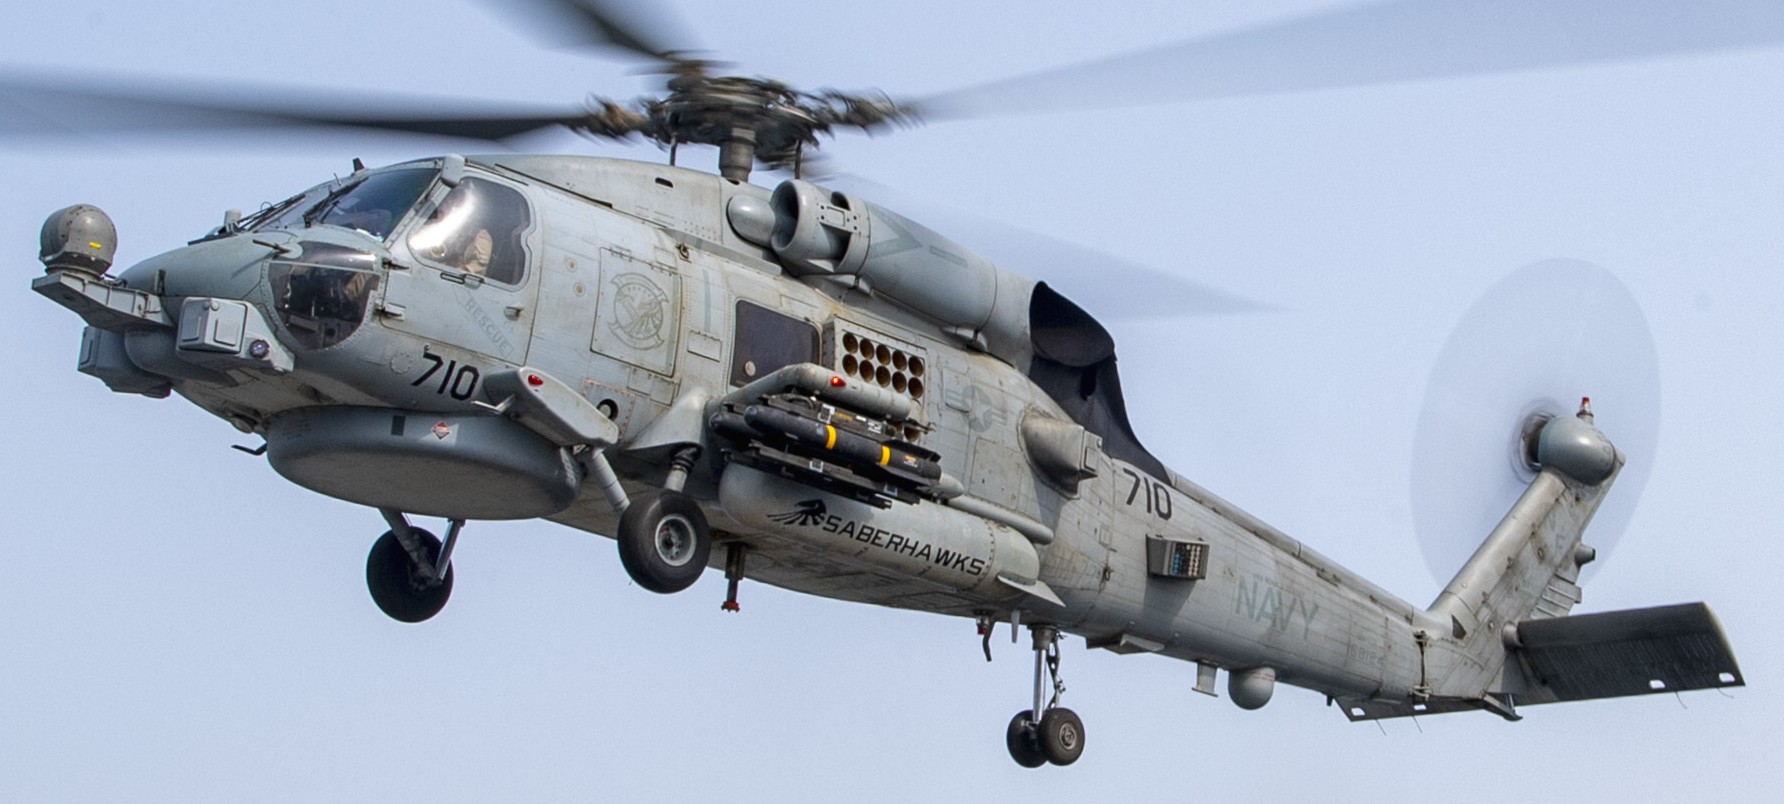 hsm-77 saberhawks helicopter maritime strike squadron mh-60r seahawk agm-114 hellfire missile 86